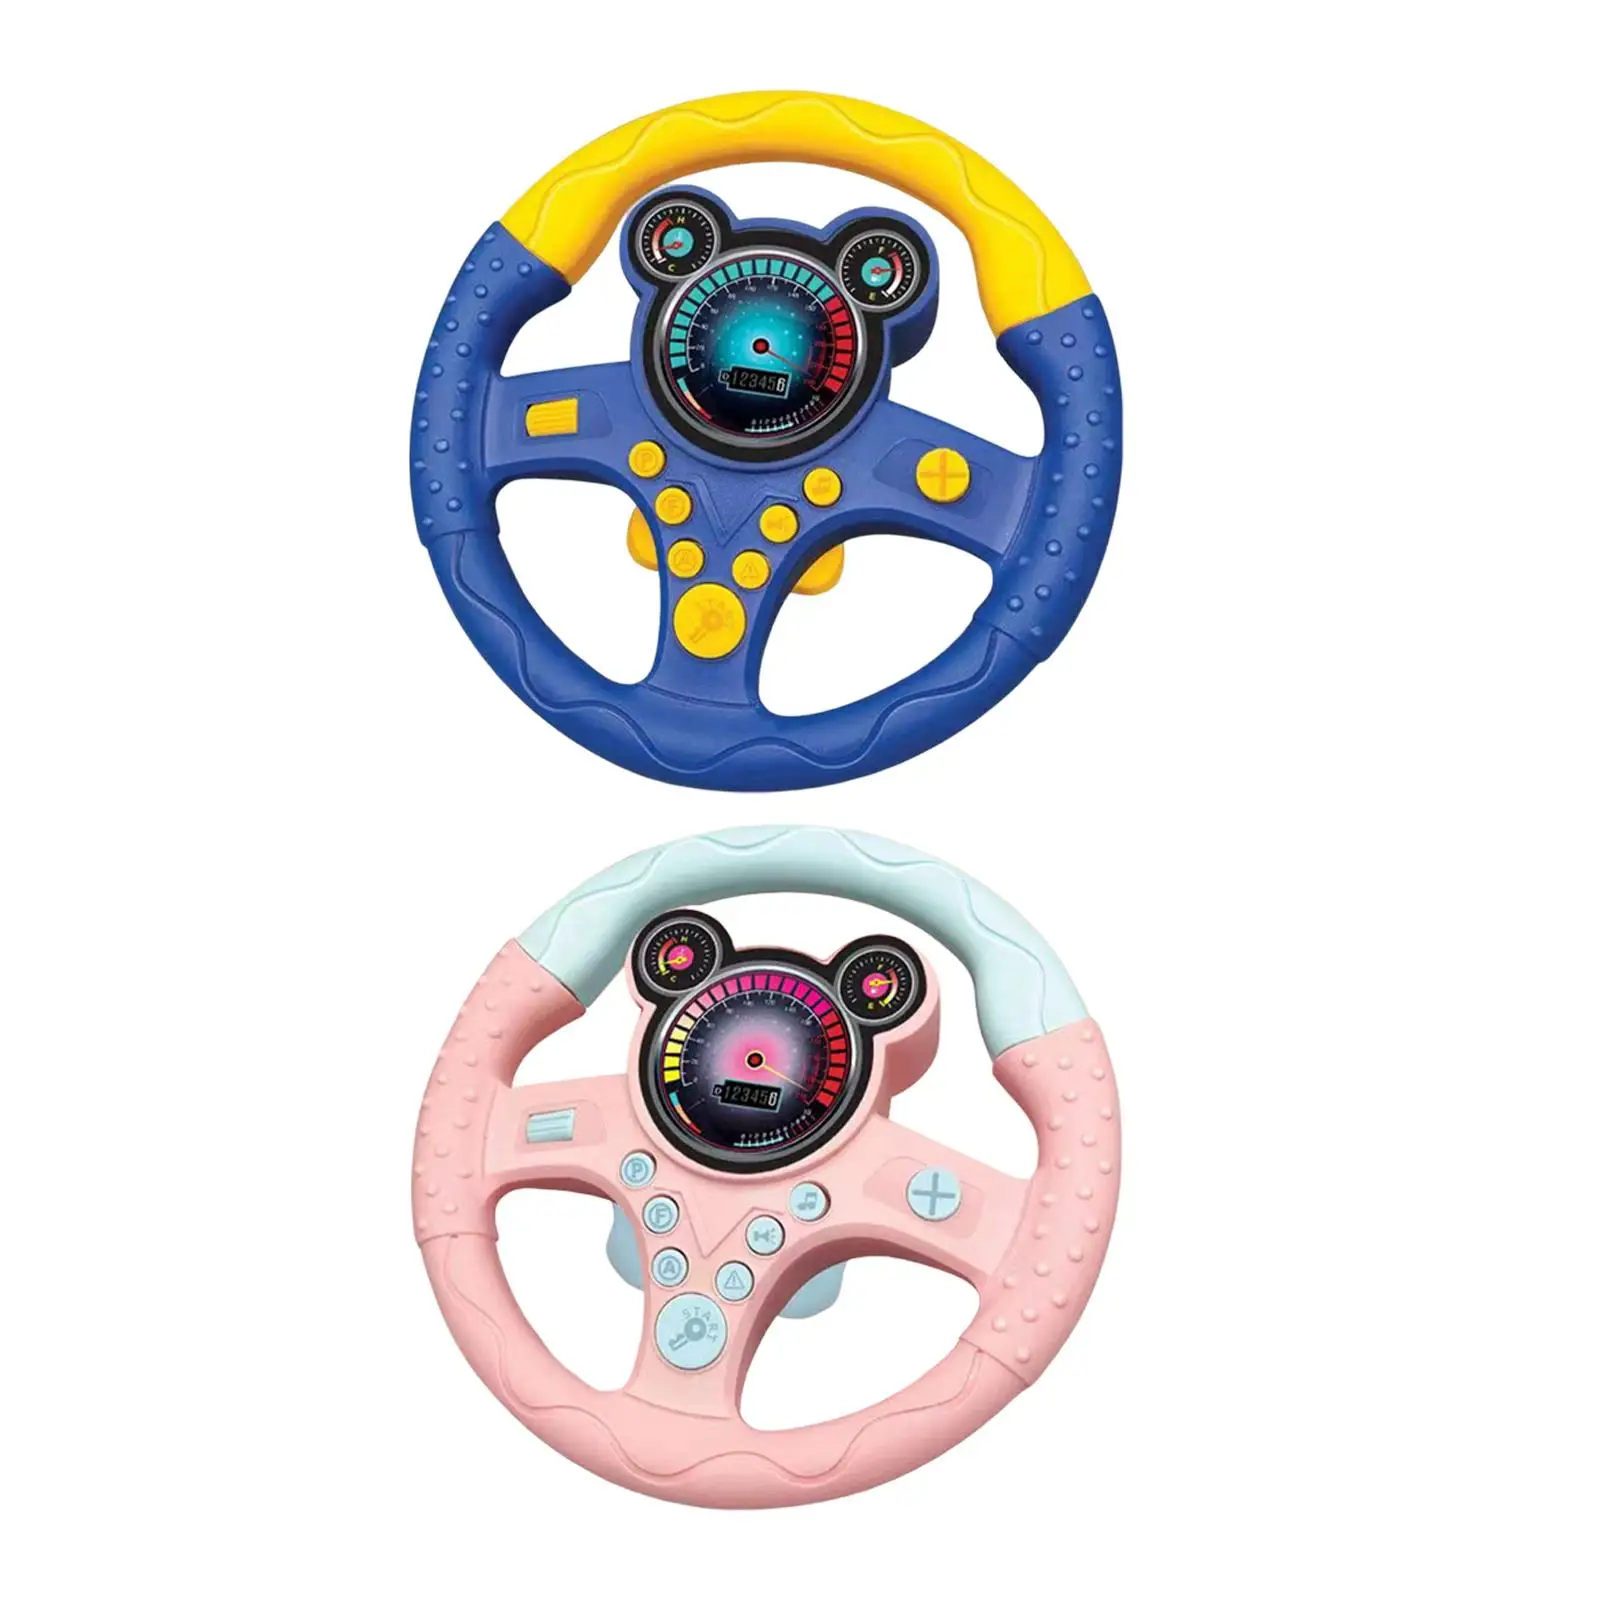 Simulated Steering Wheel Battery Powered Driving Kids Electric Wheel Toy for Garden Treehouse Amusement Park Playground Gifts